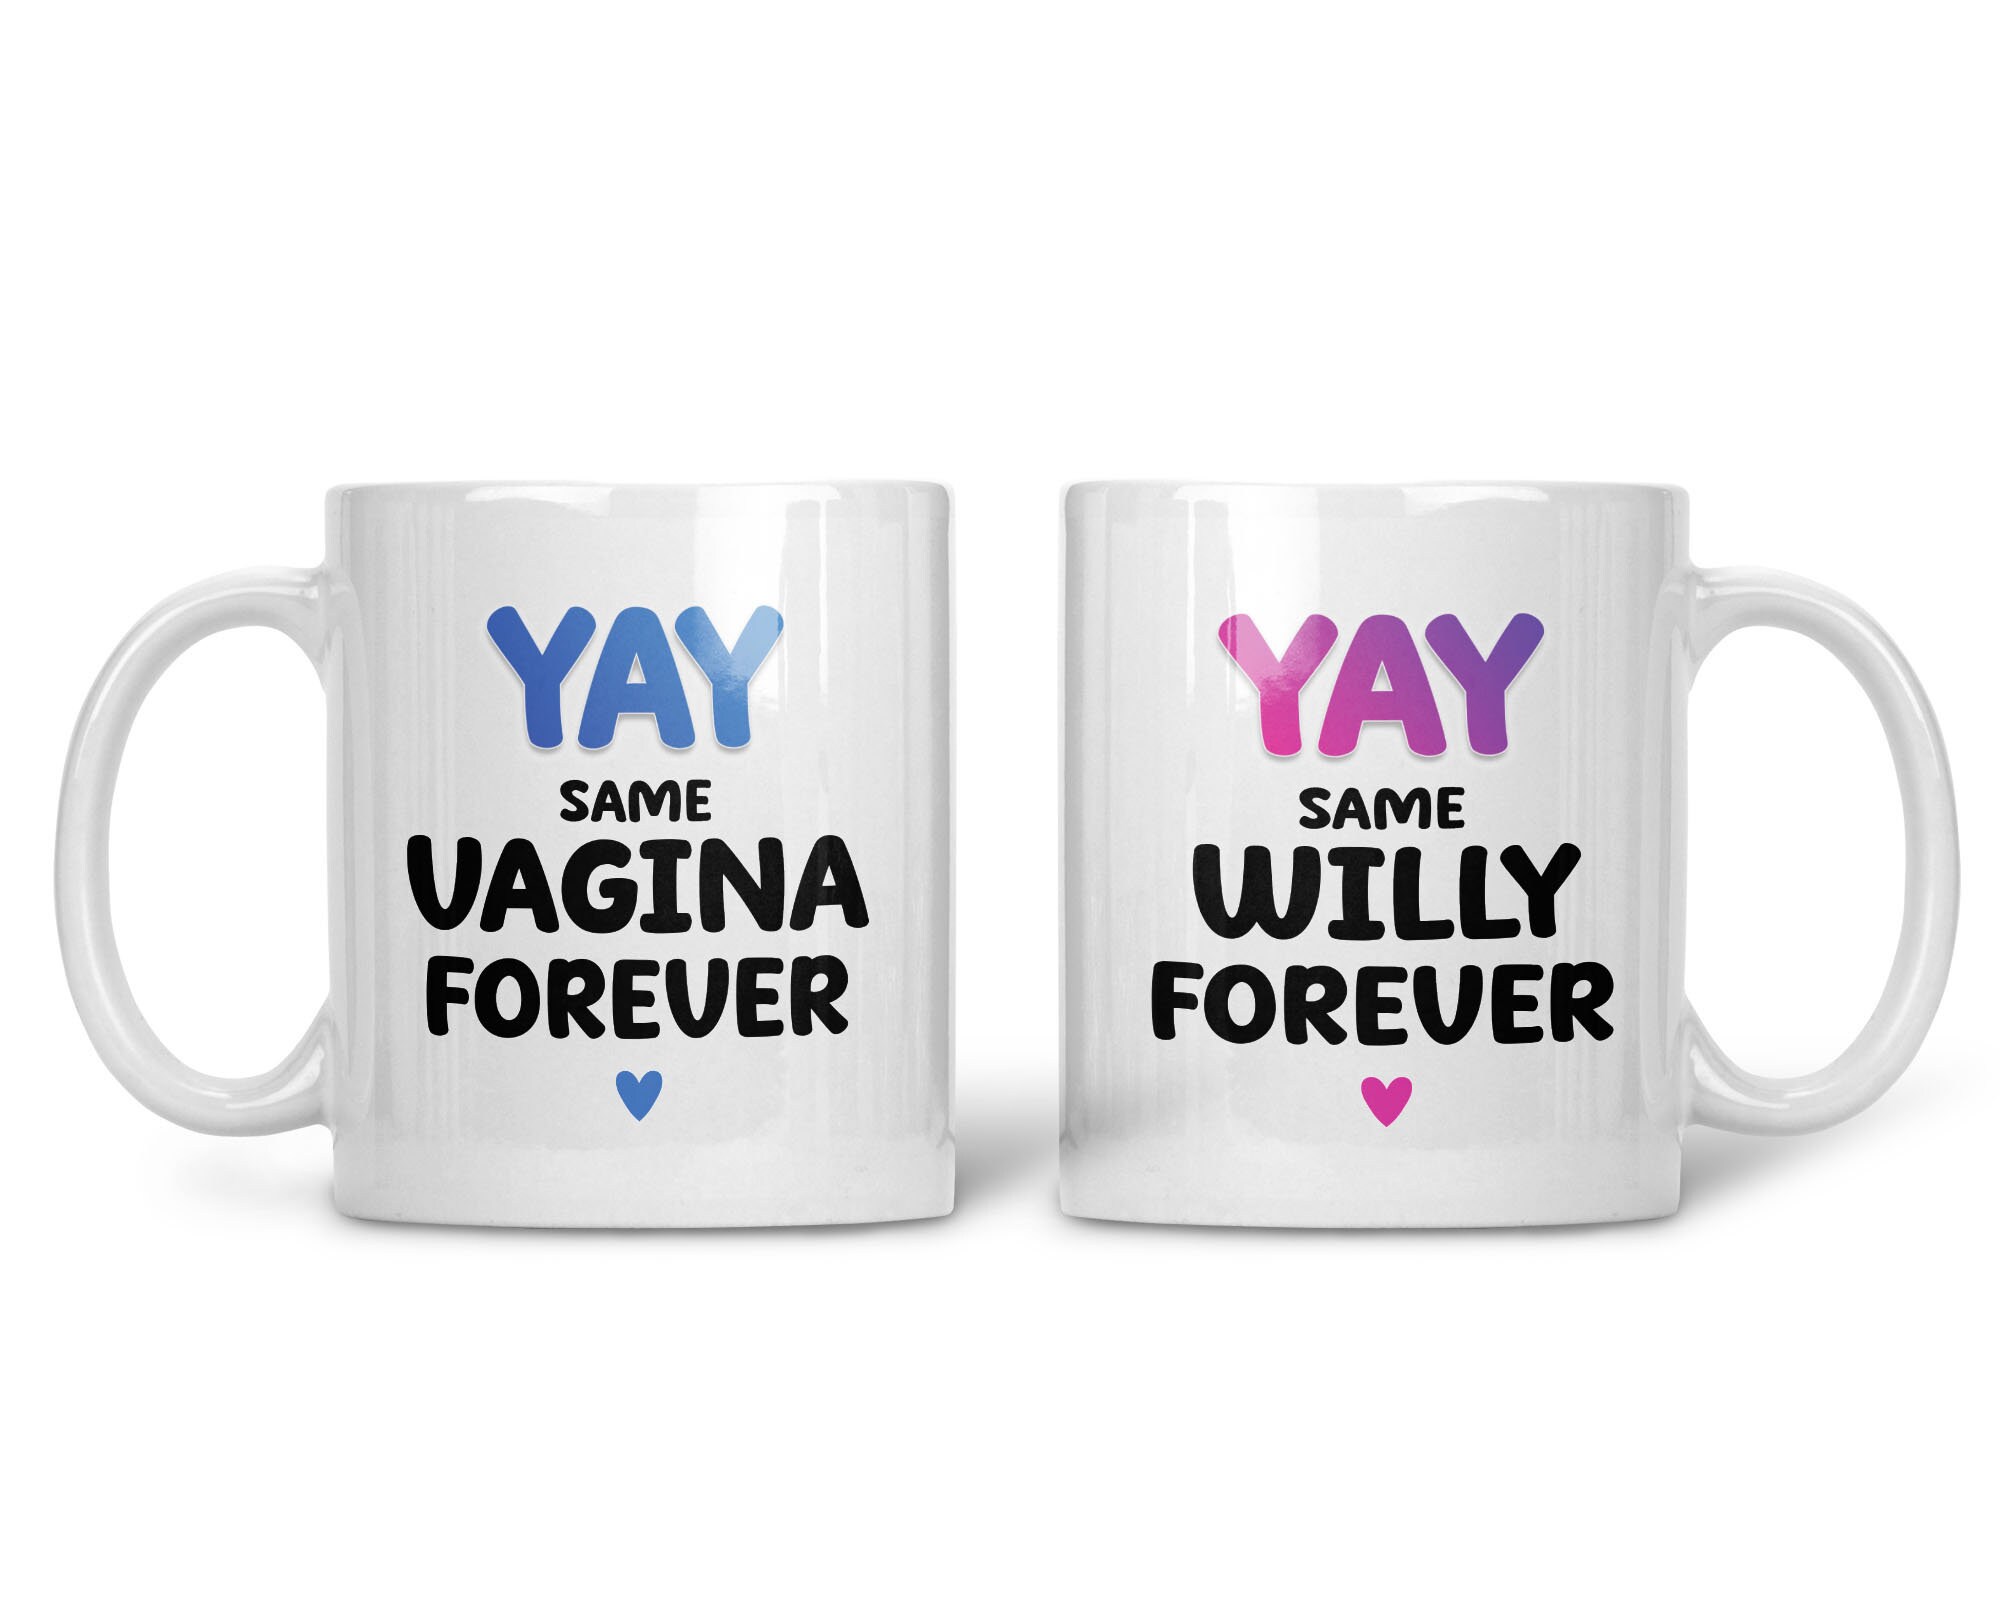 Same Penis Forever Cups & Penis Straws - Yippee Daisy